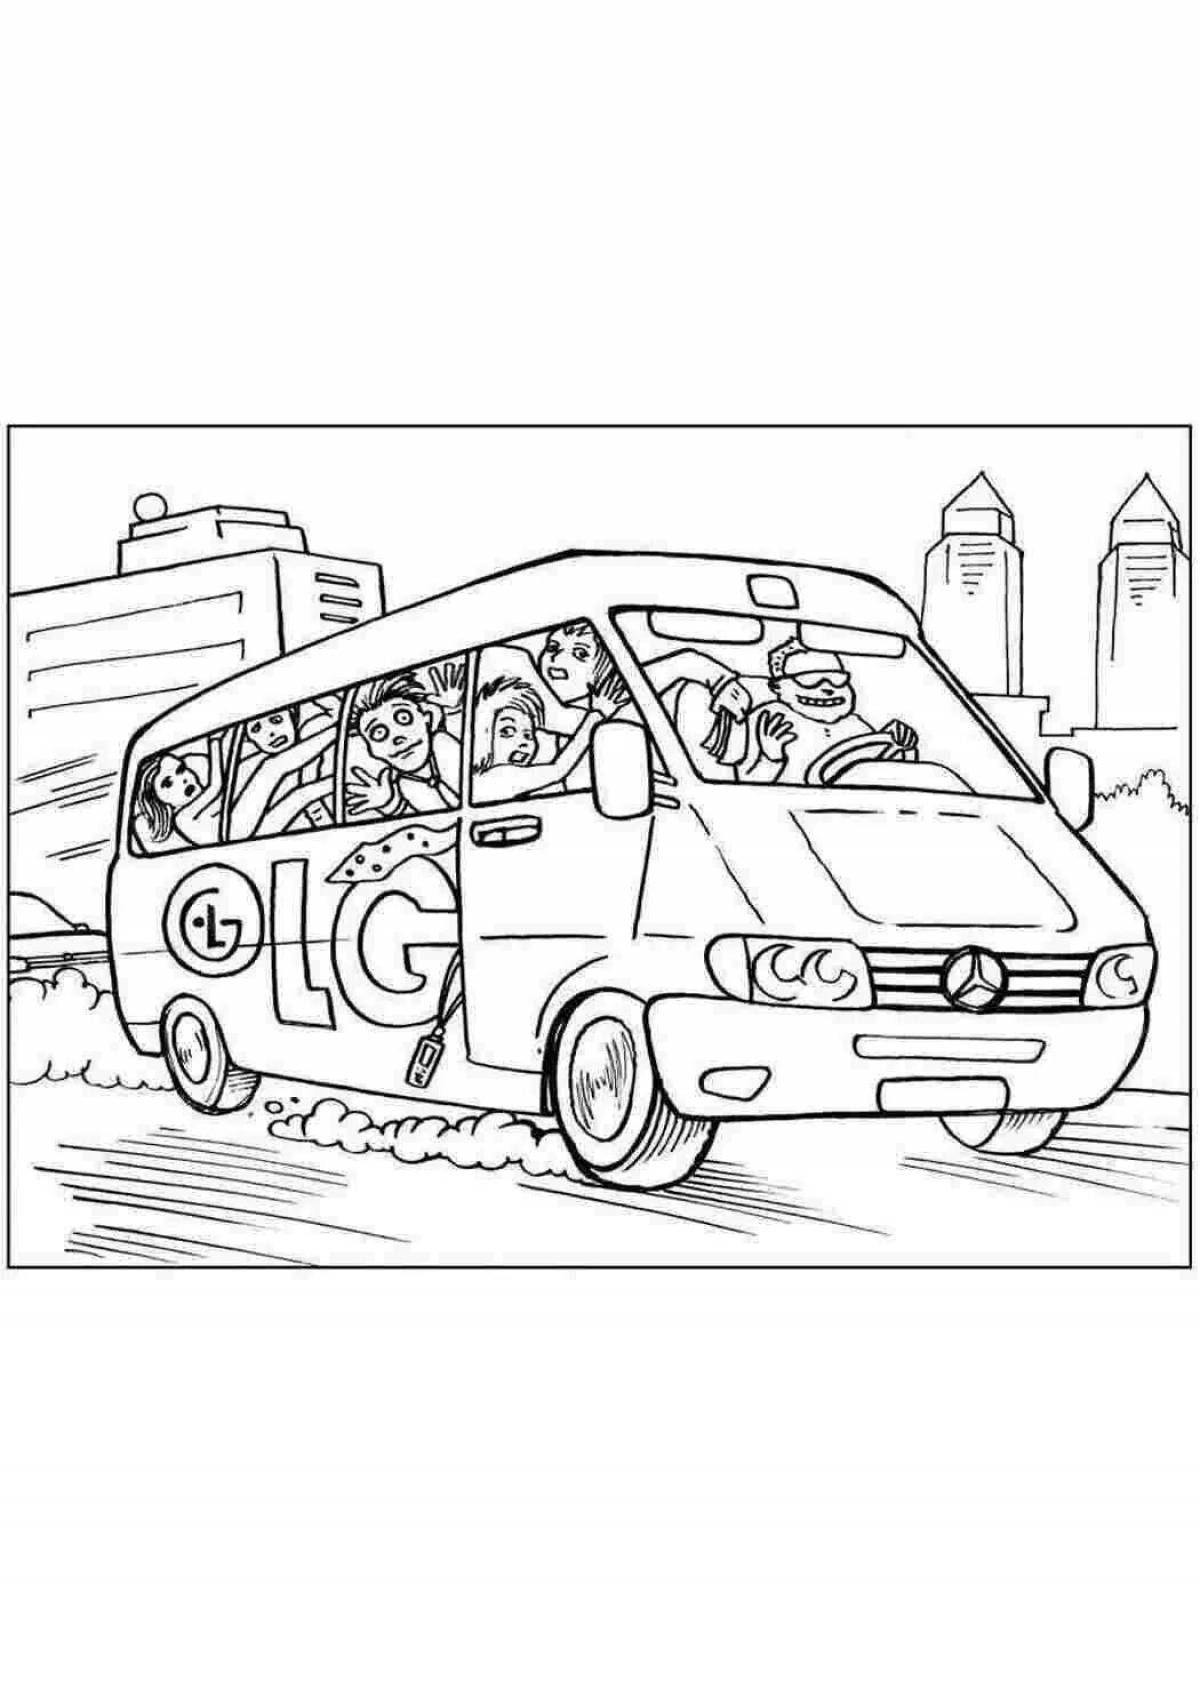 Adorable cars and buses coloring page